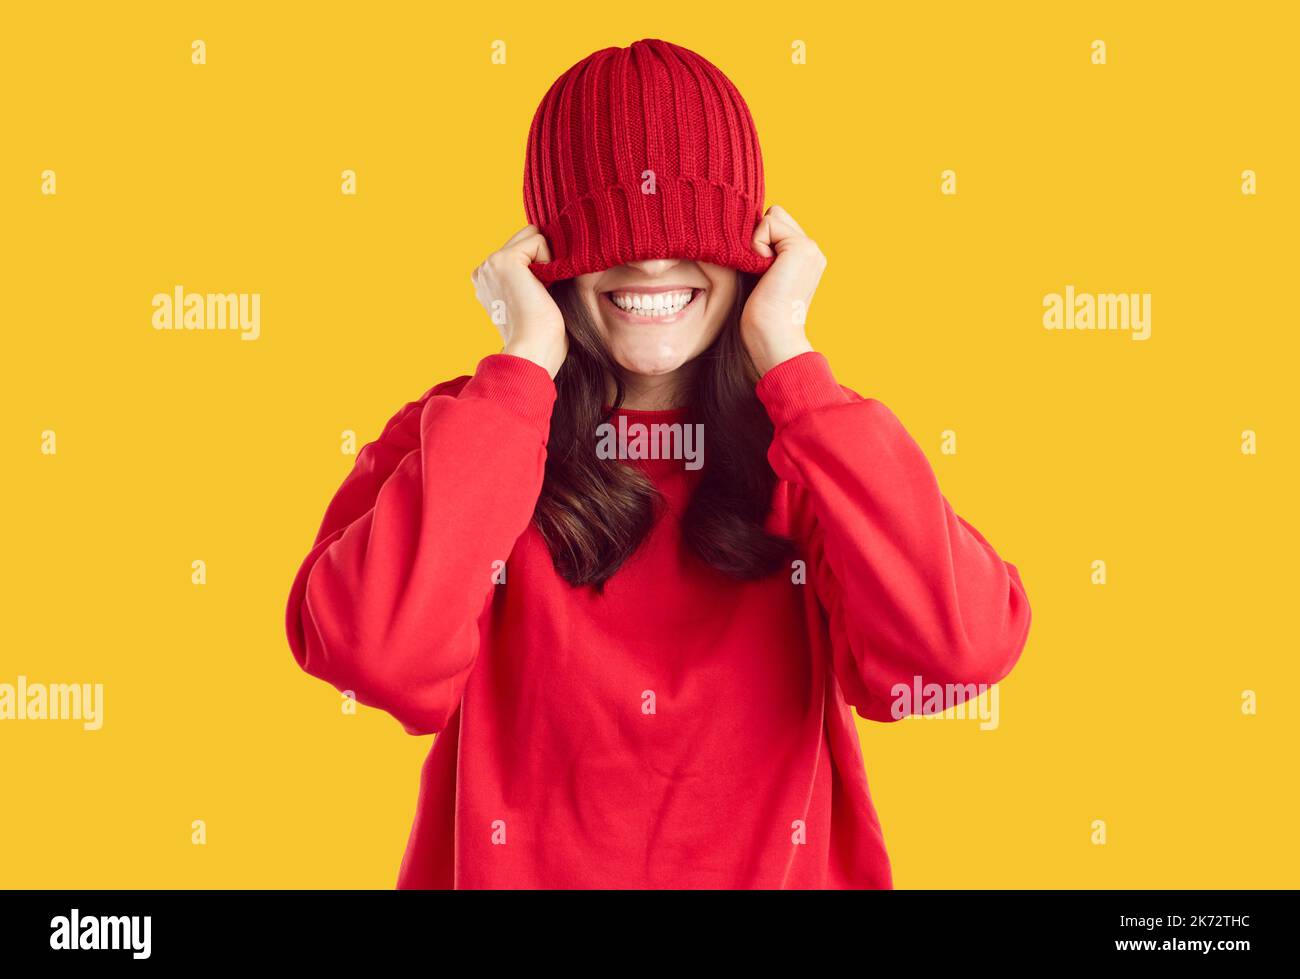 Joyful young woman covers her eyes with warm red winter hat that she puts on her head Stock Photo